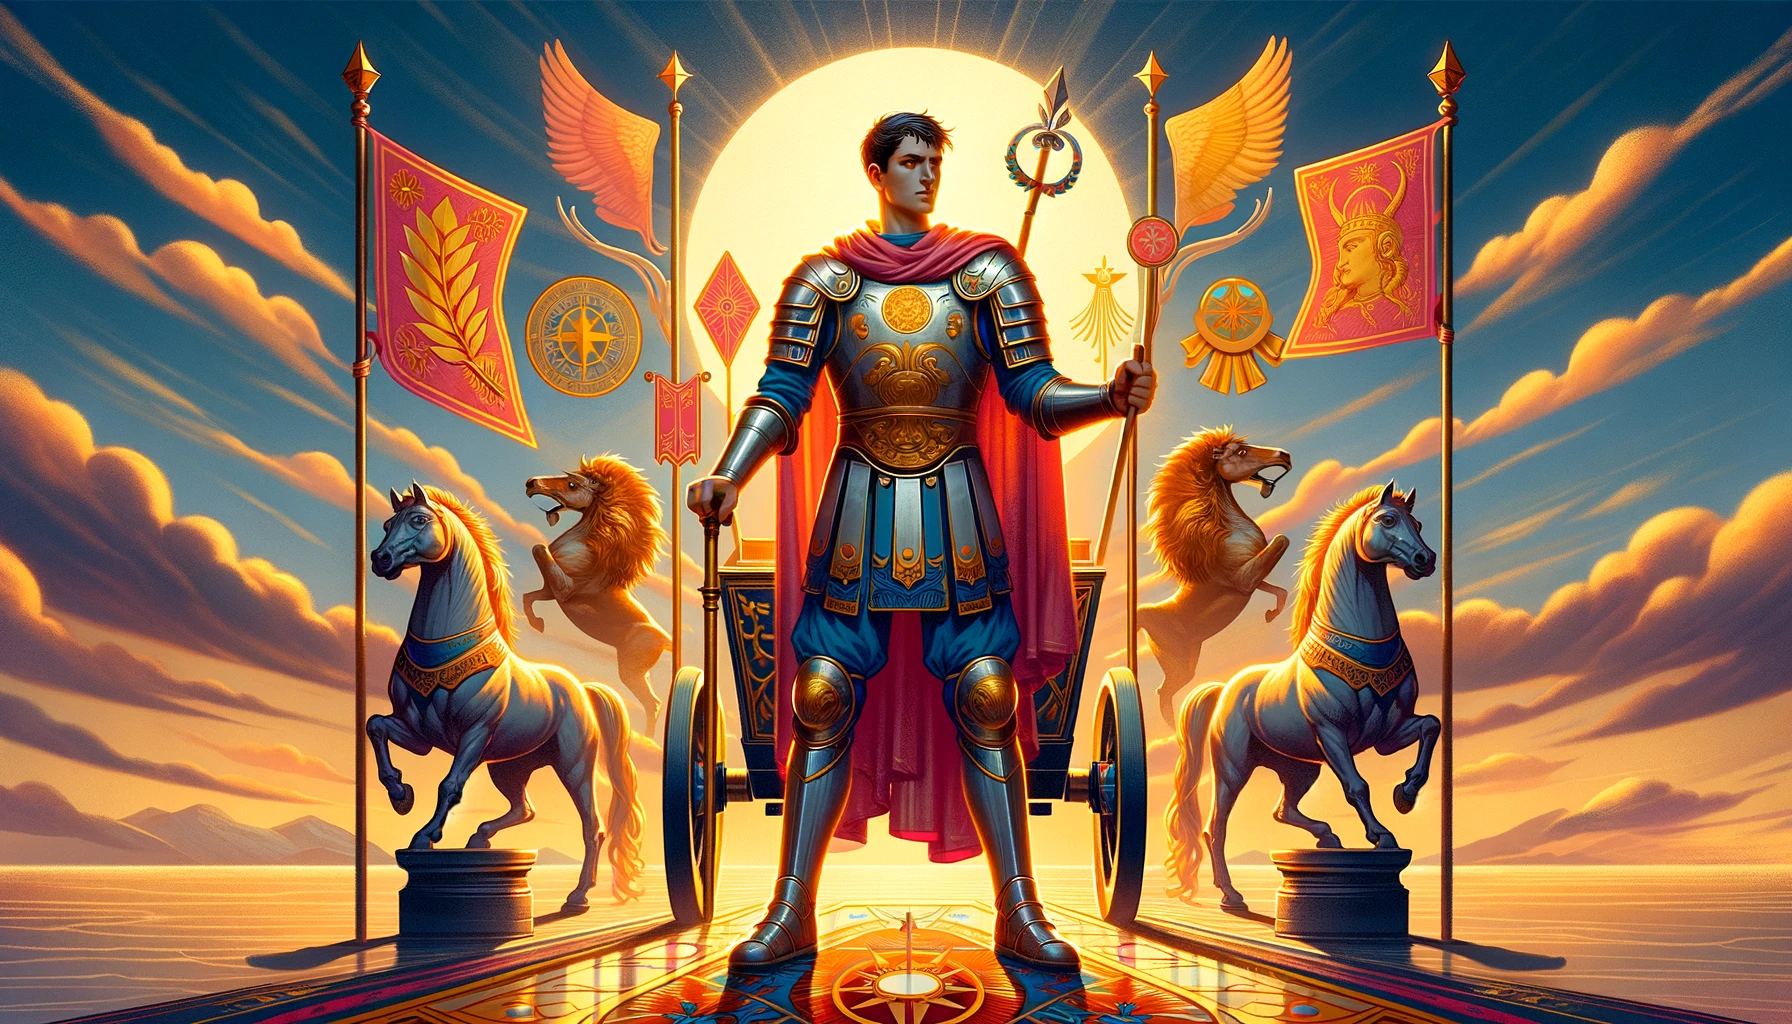 "Confident figure of The Chariot surrounded by symbols of victory and ambition. Bold reds, golds, and blues convey empowerment, triumph, strength, courage, and glory associated with The Chariot card."